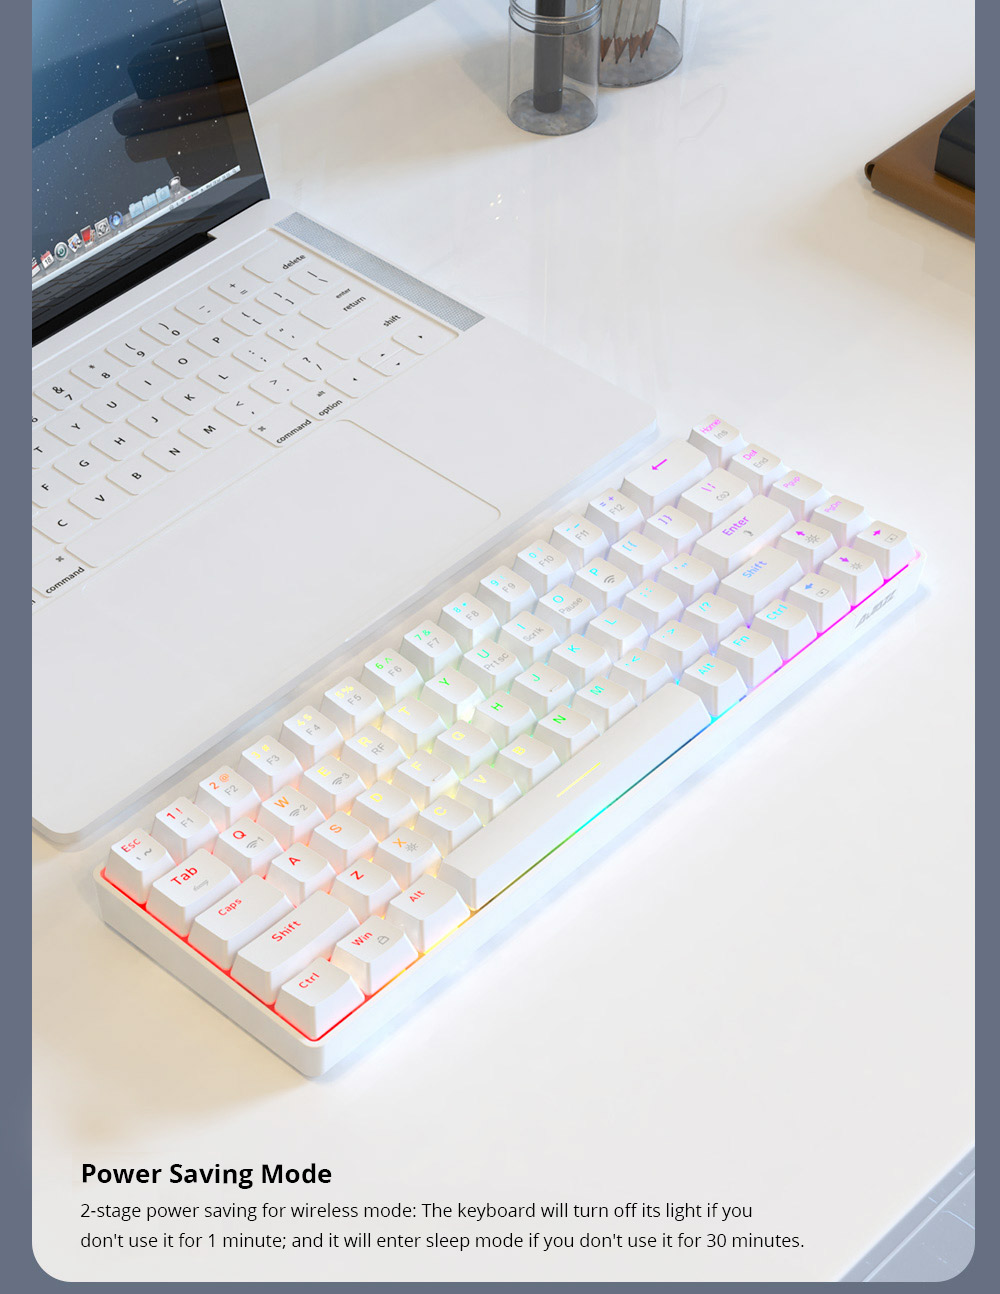 Ajazz K685T RGB Hot-swappable 68 Keys Mechanical Keyboard, Wired + Bluetooth + 2.4GHz Wireless Connection, Red Switch - White